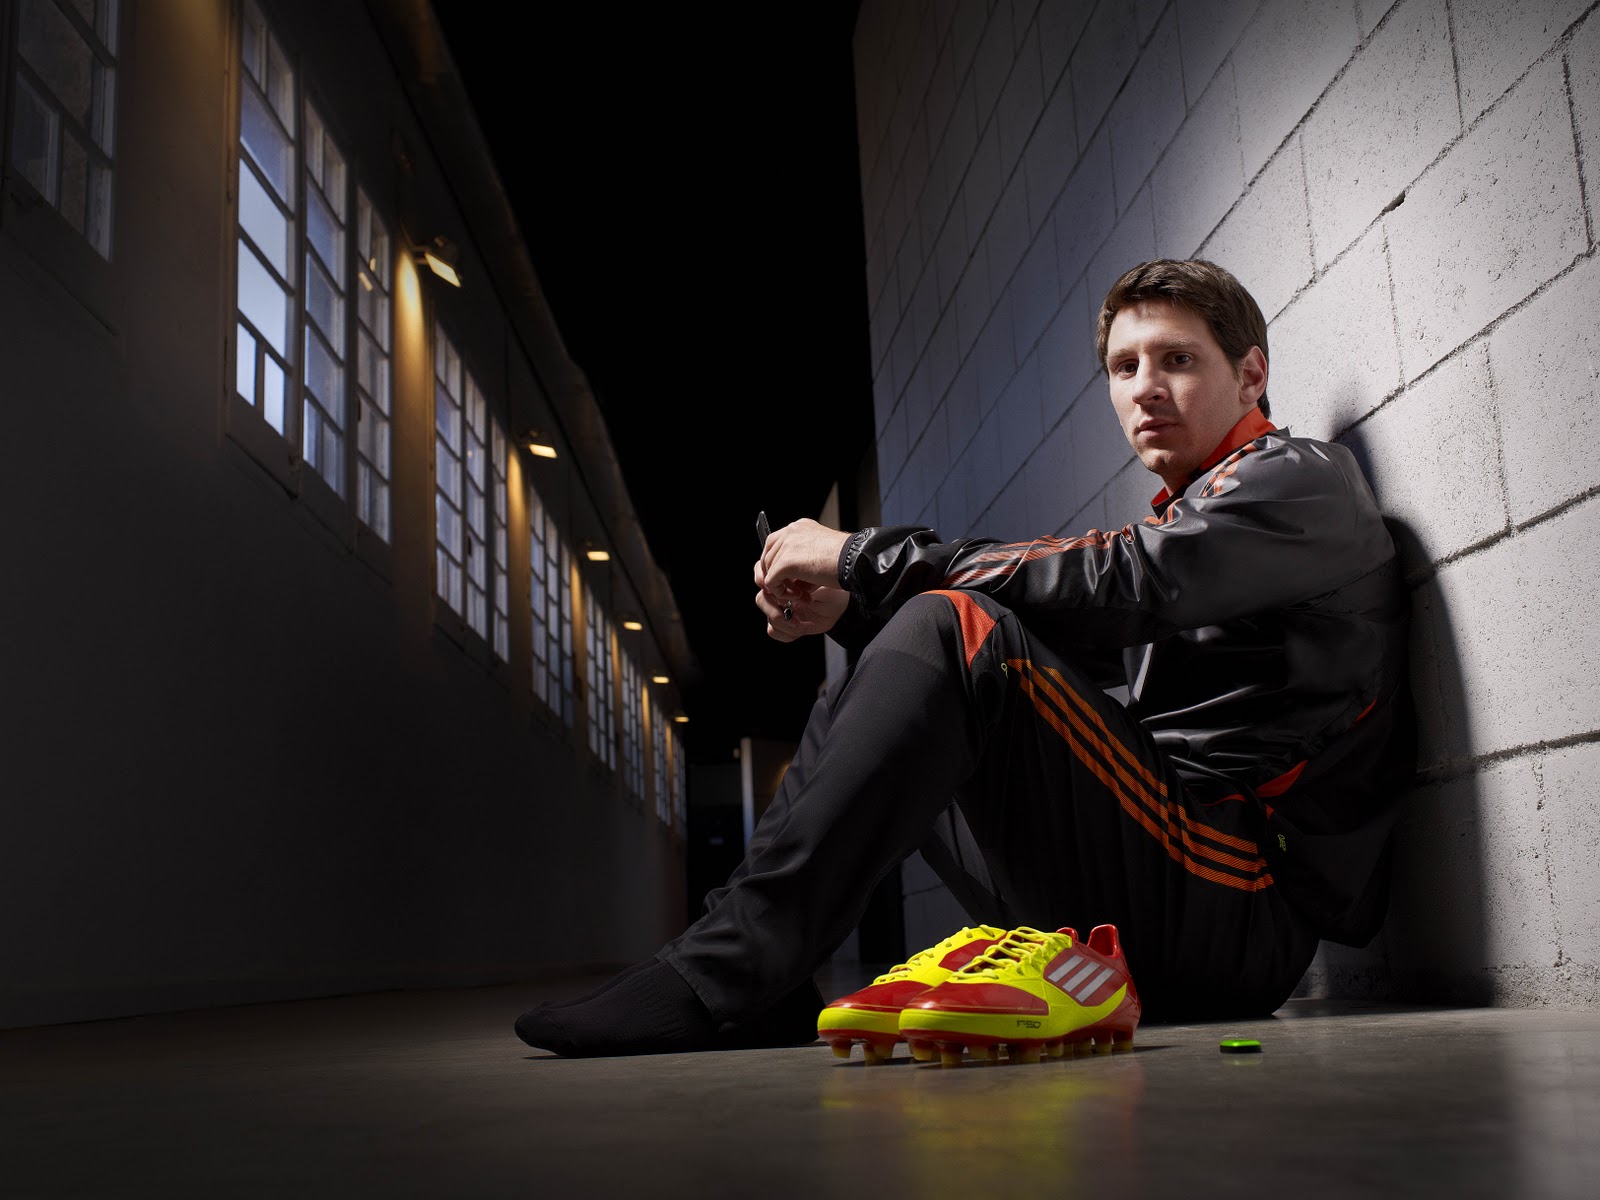 DISKIOFF: adidas launches adizero - The Football Boot with a Brain